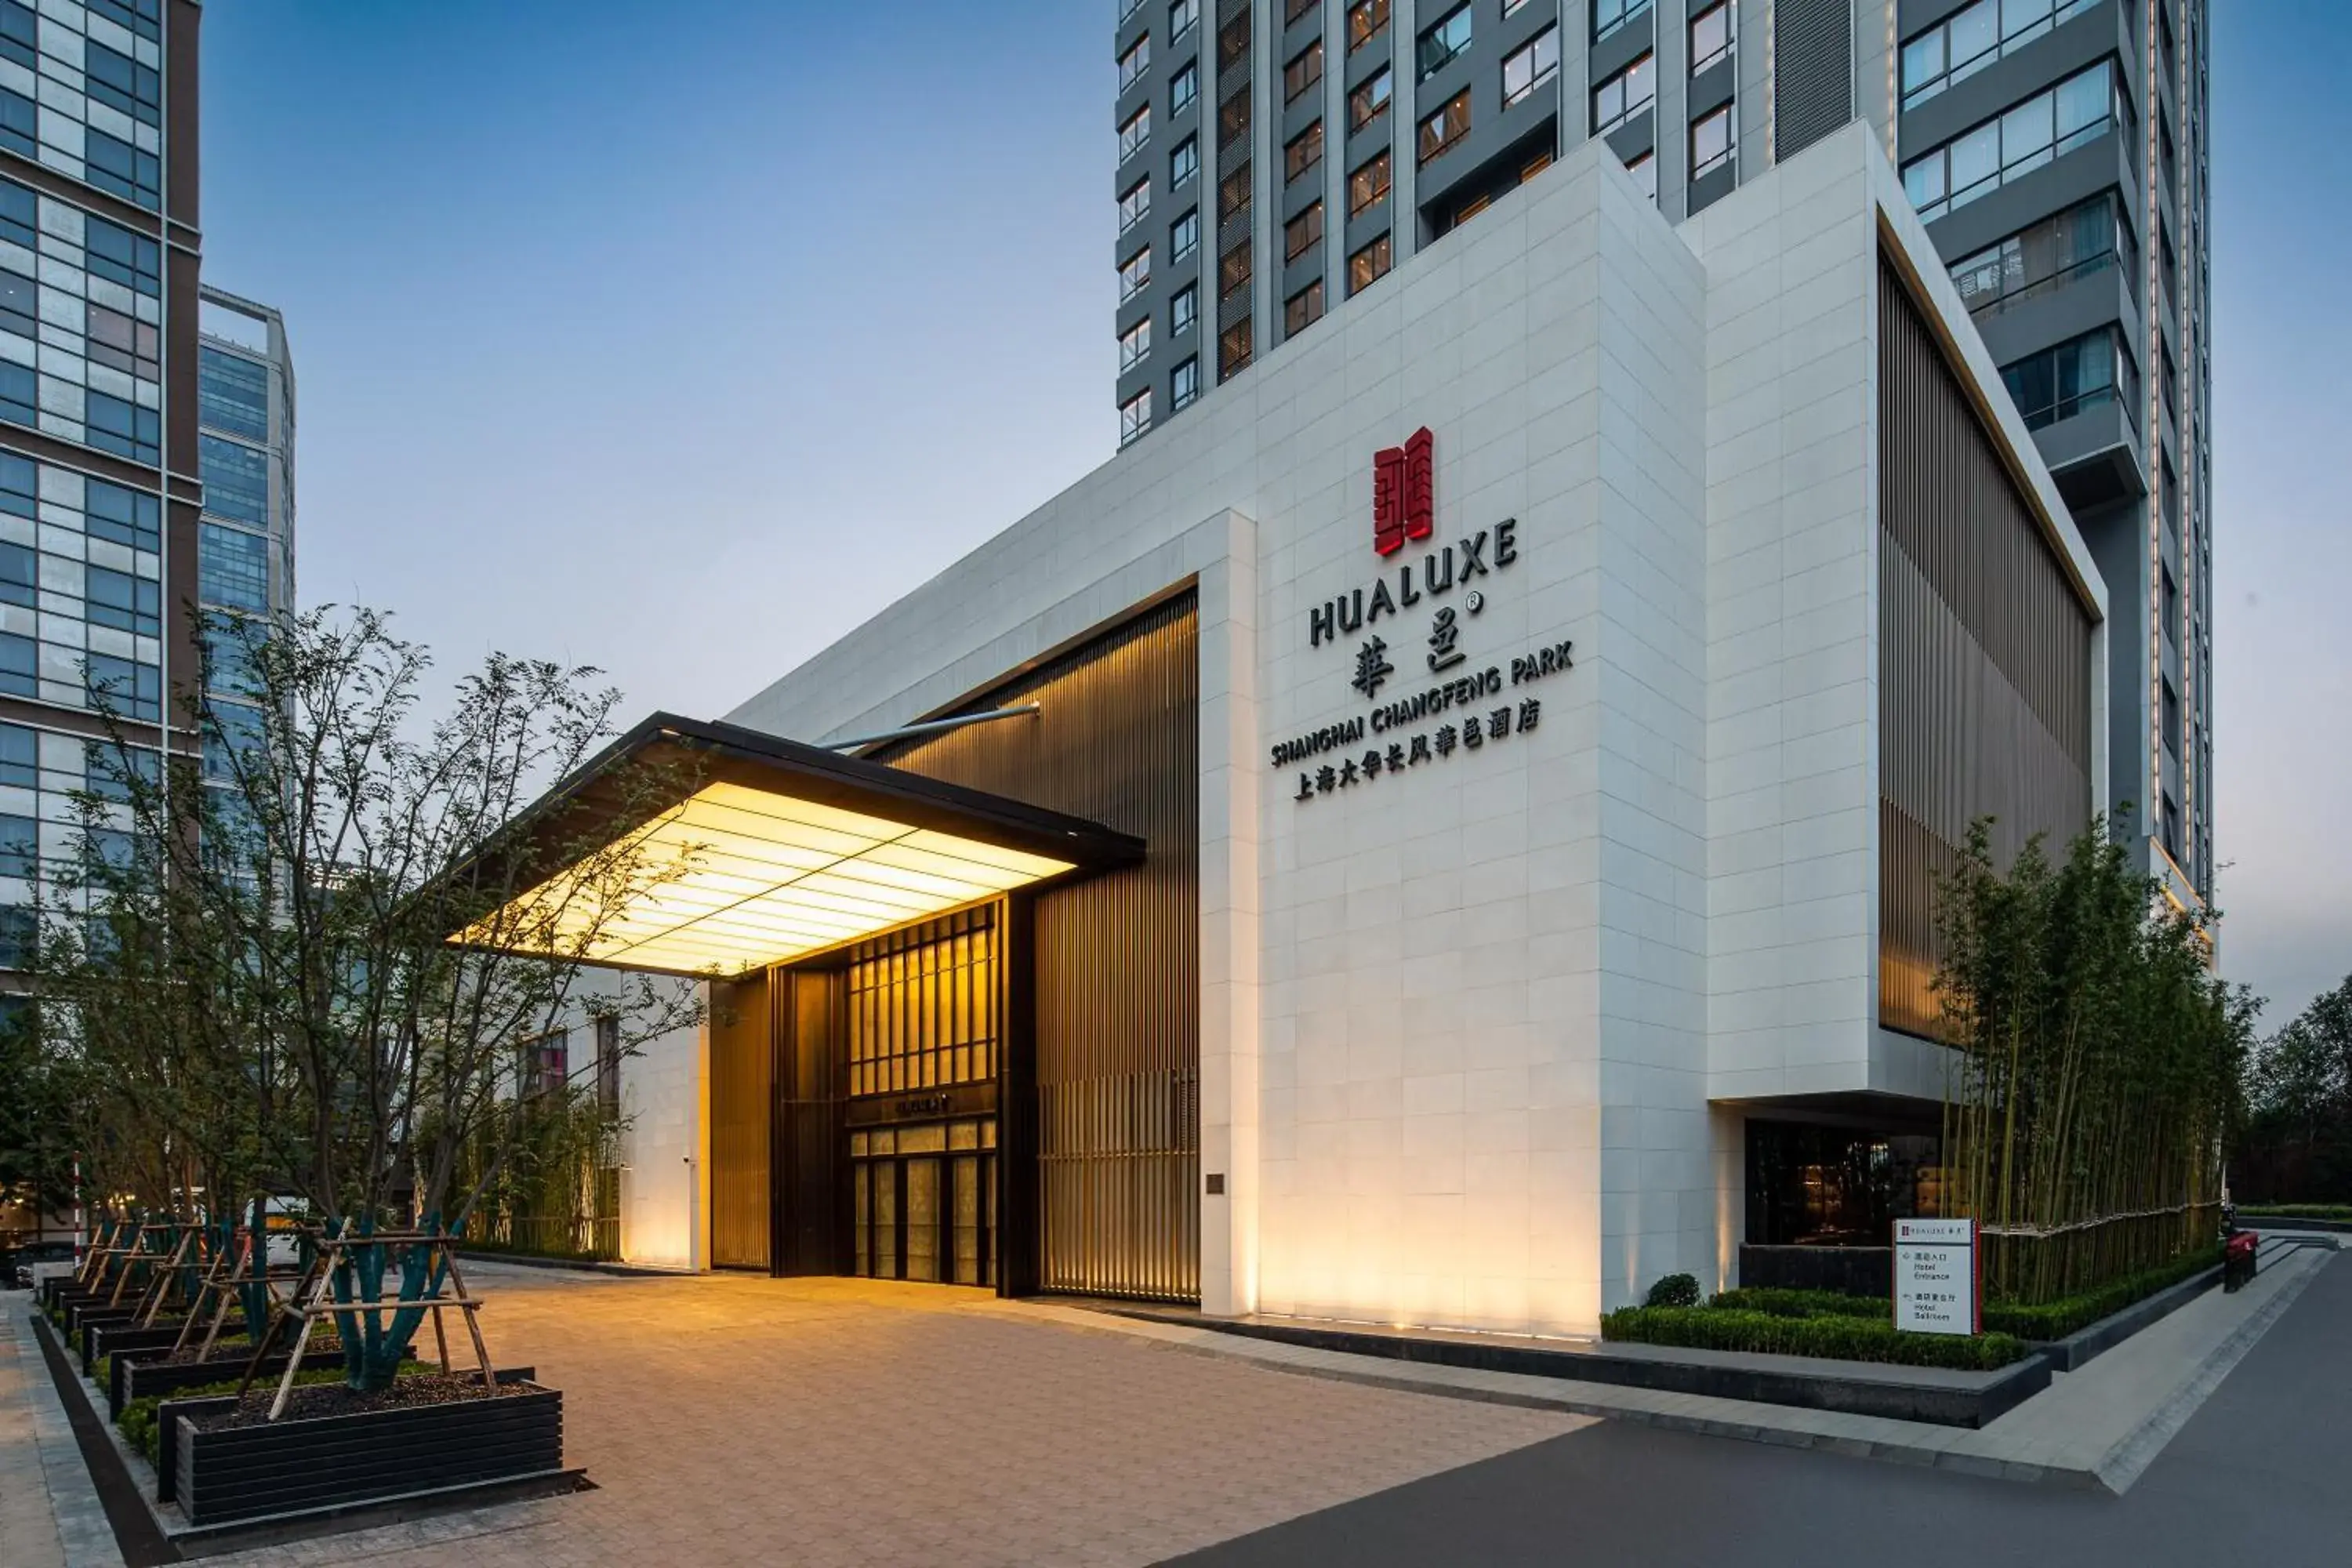 Property Building in HUALUXE Shanghai Changfeng Park, an IHG Hotel